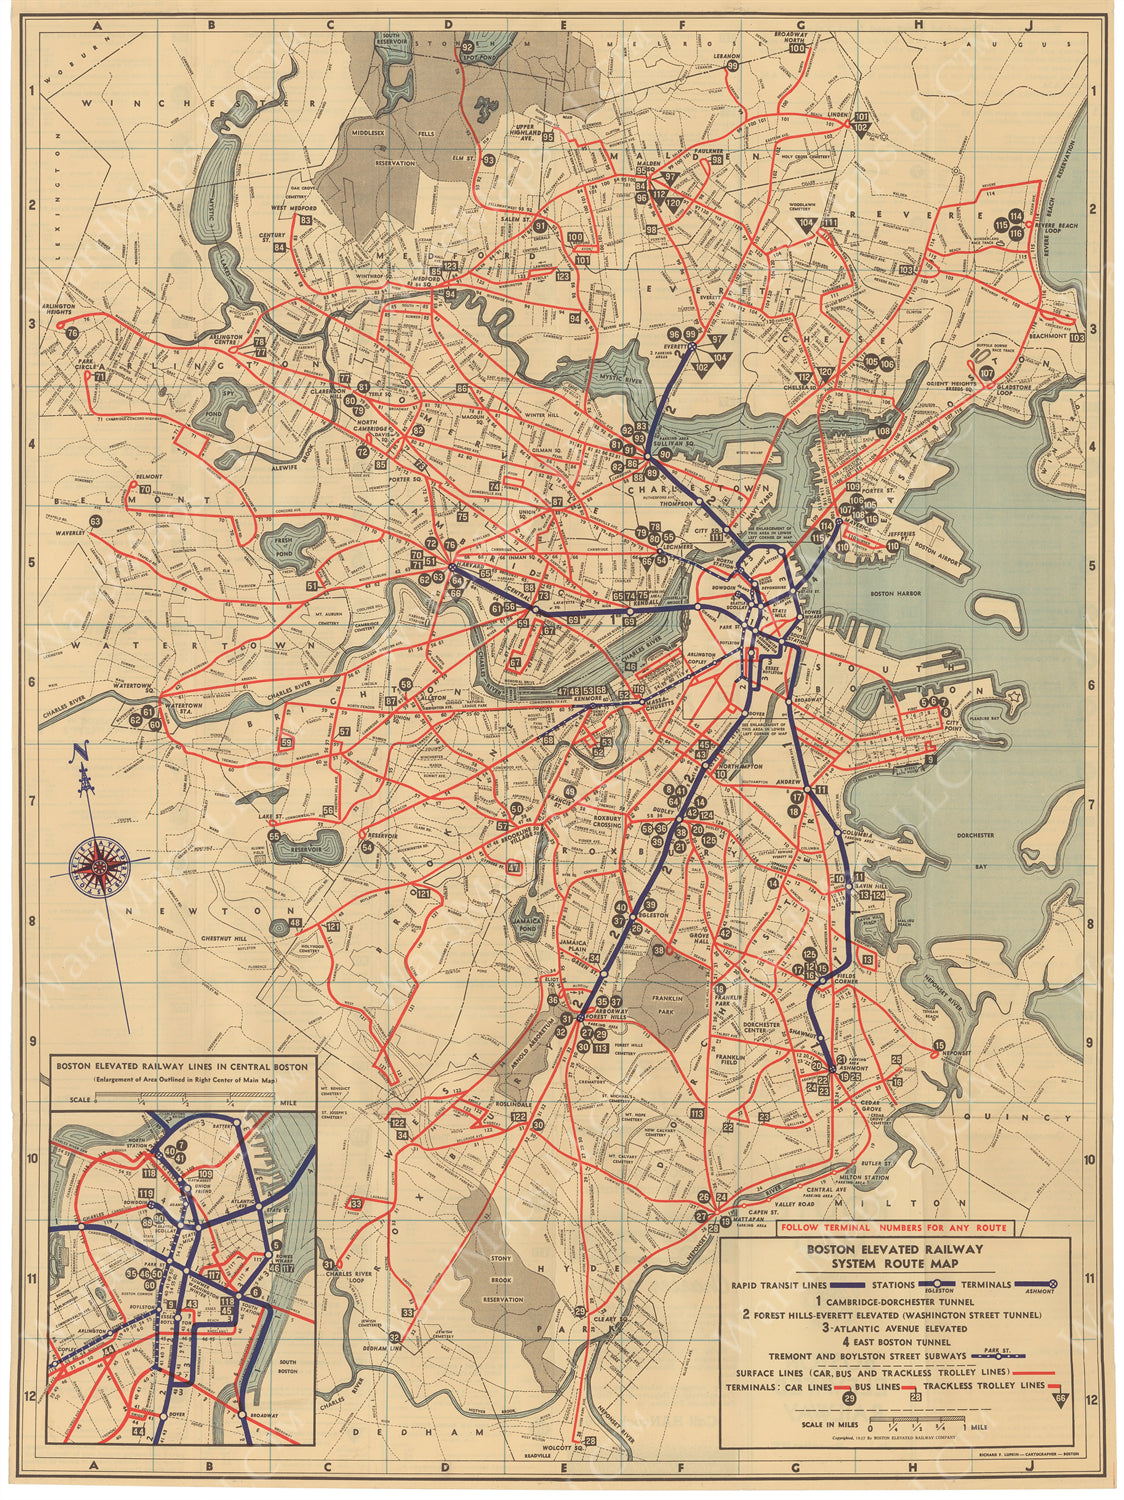 Boston Elevated Railway Co. (Massachusetts) System Route Map #2 1937